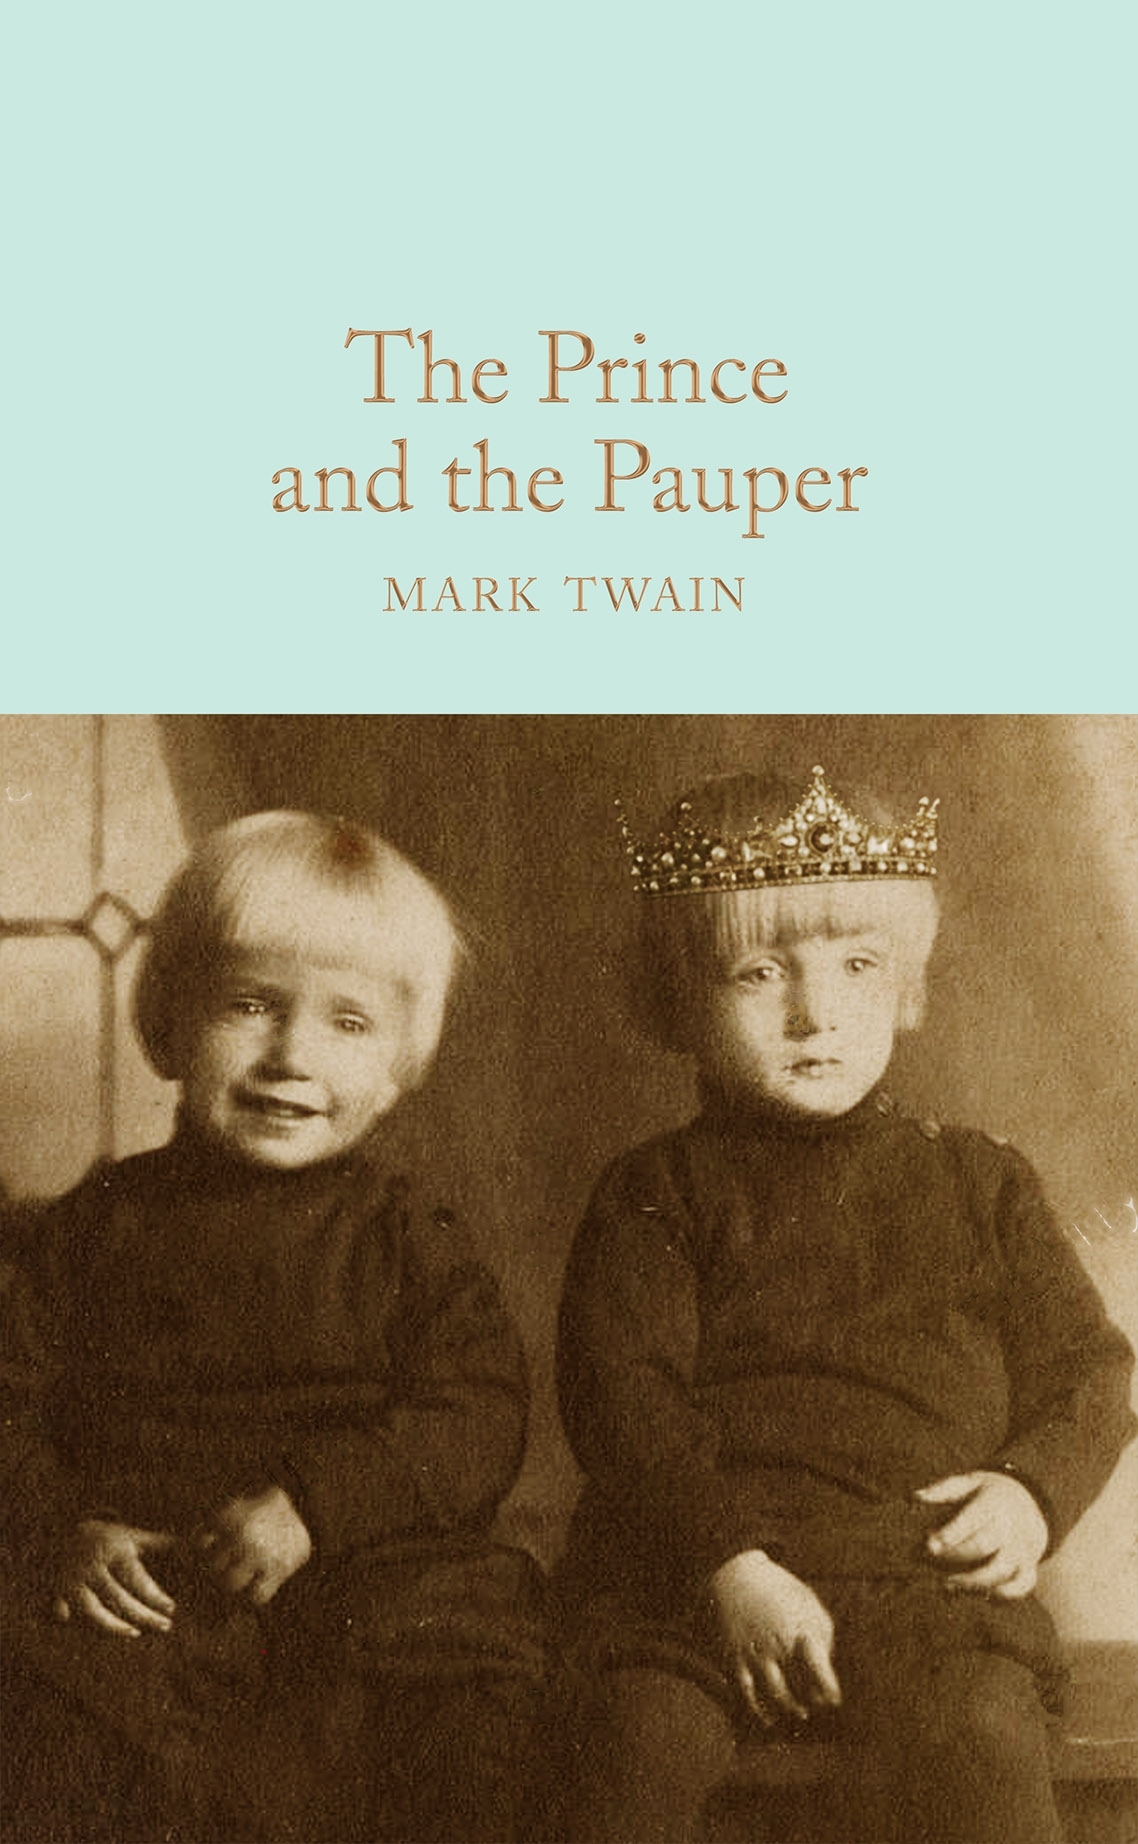 Book “The Prince and the Pauper” by Mark Twain — March 3, 2020